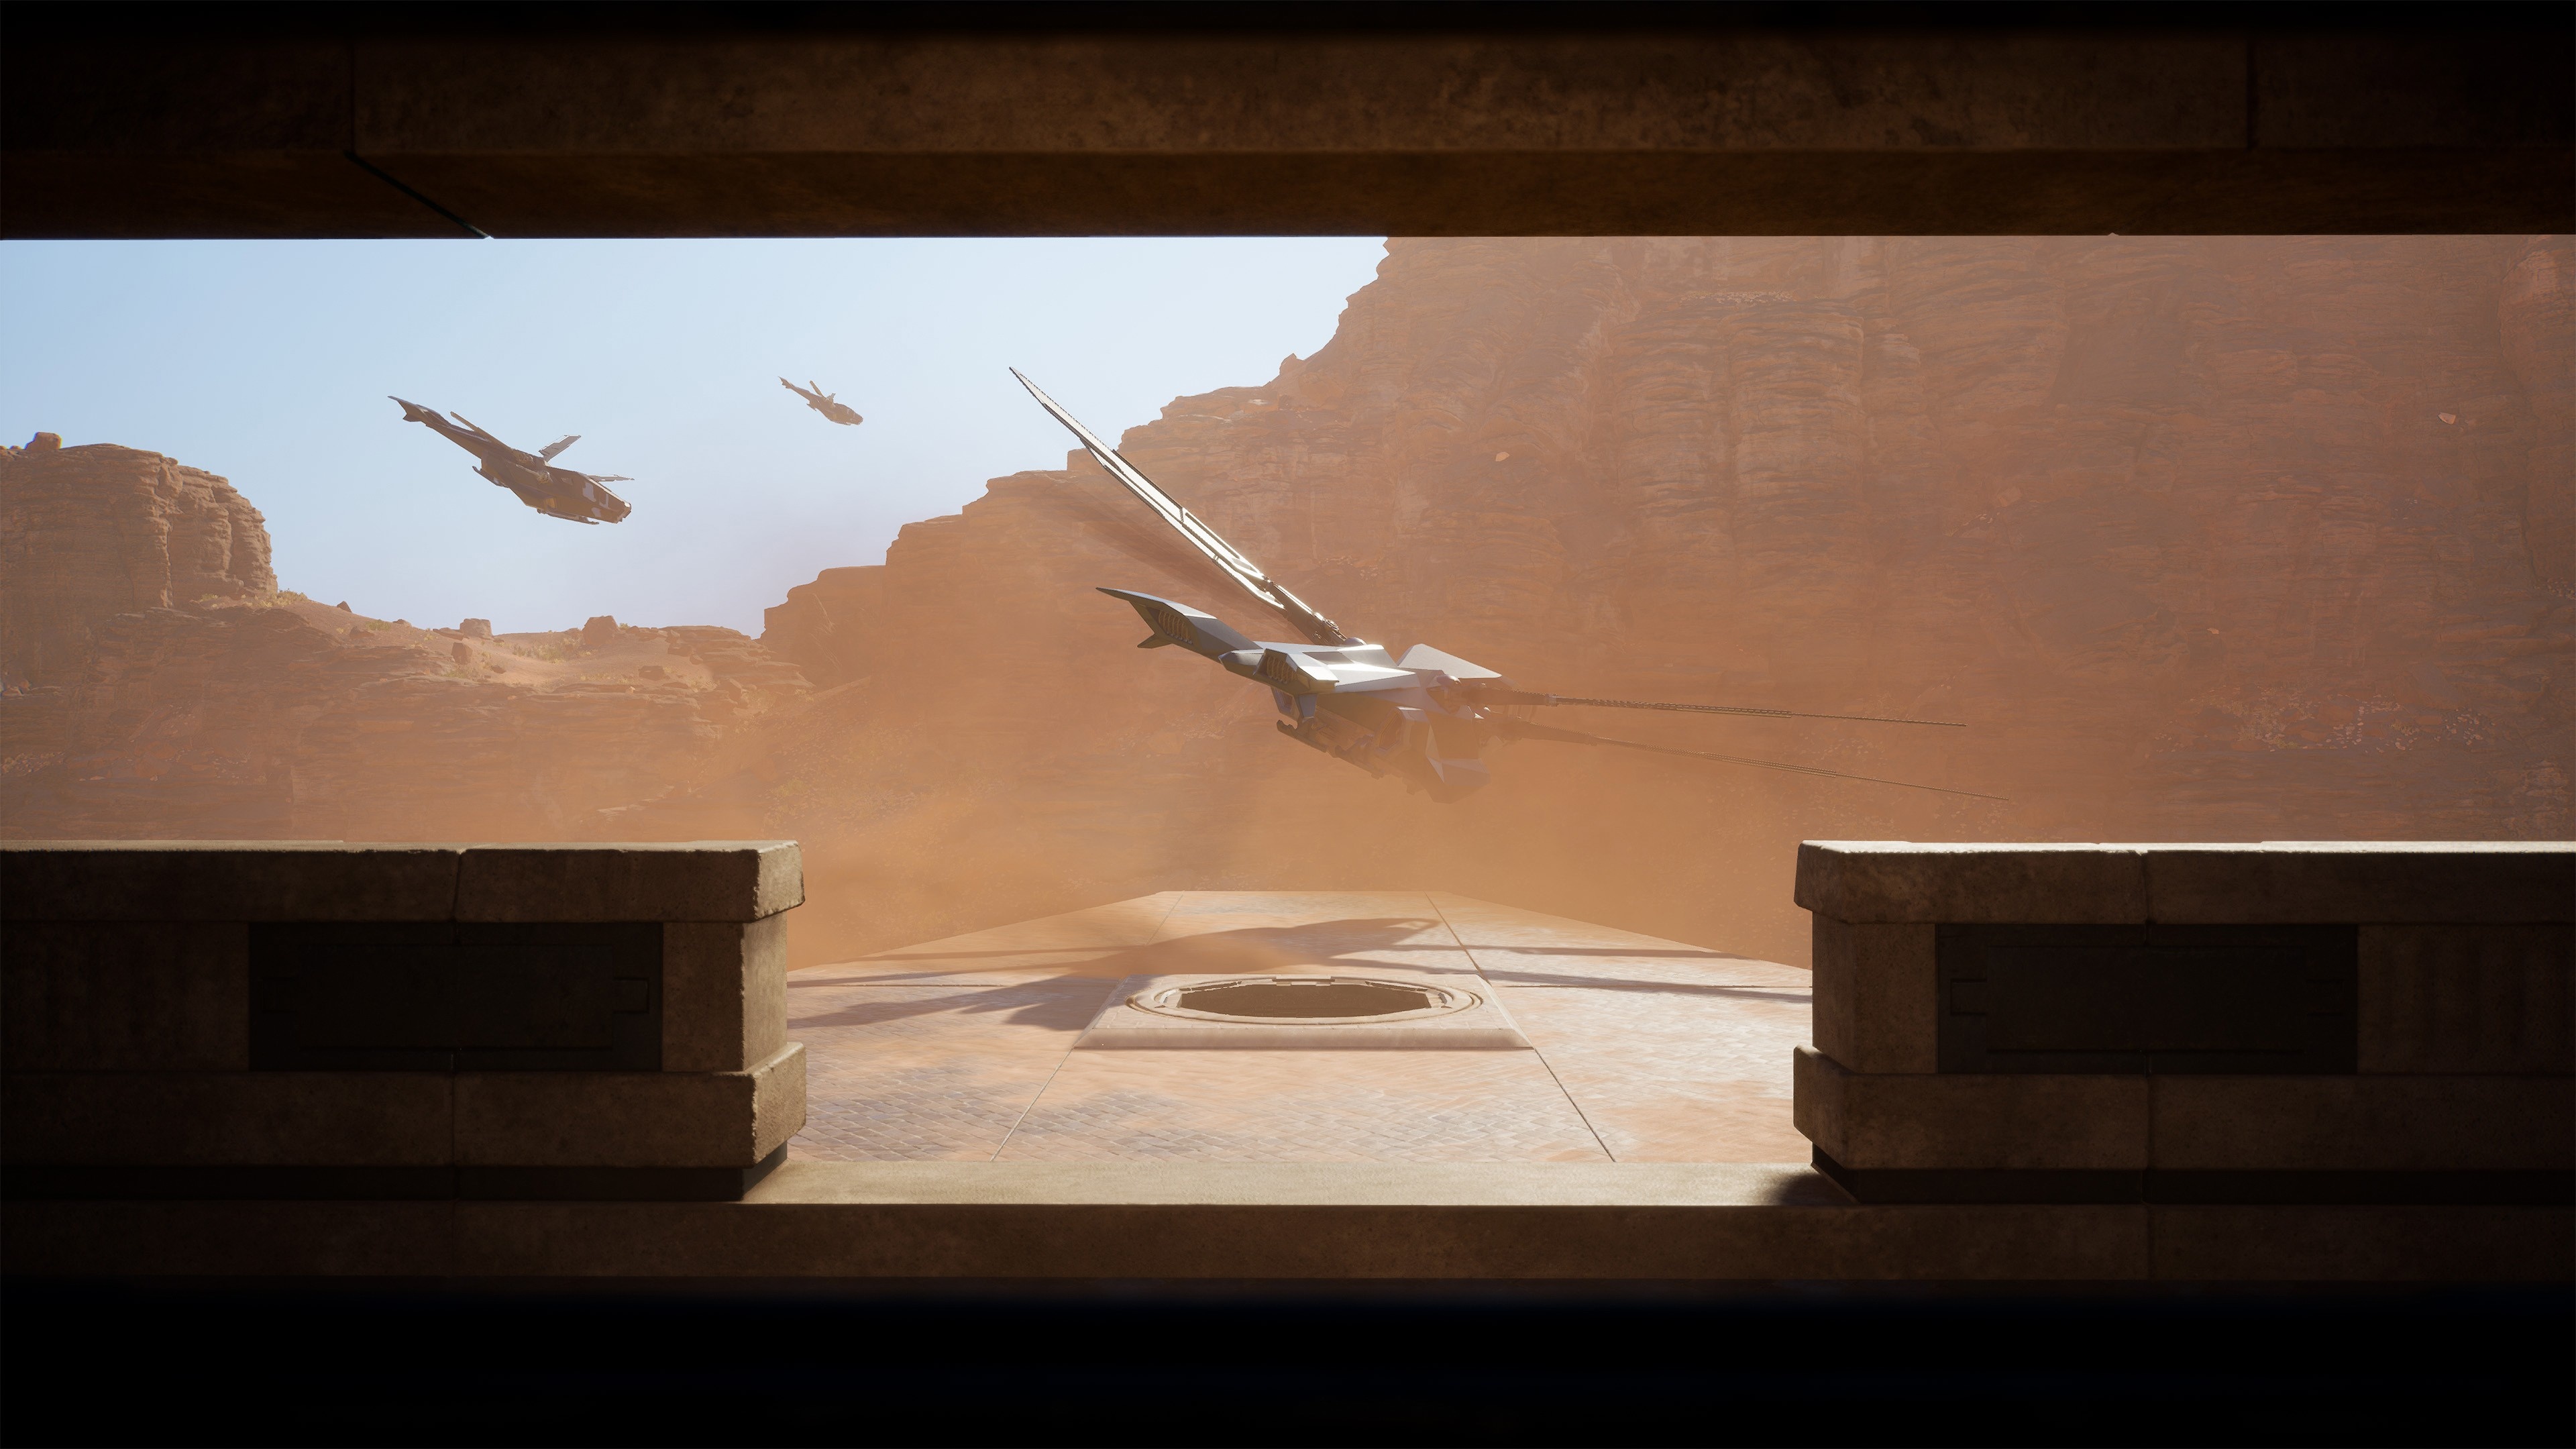 (Flying works, riding does not: The new Dune game does not have all features at release.)